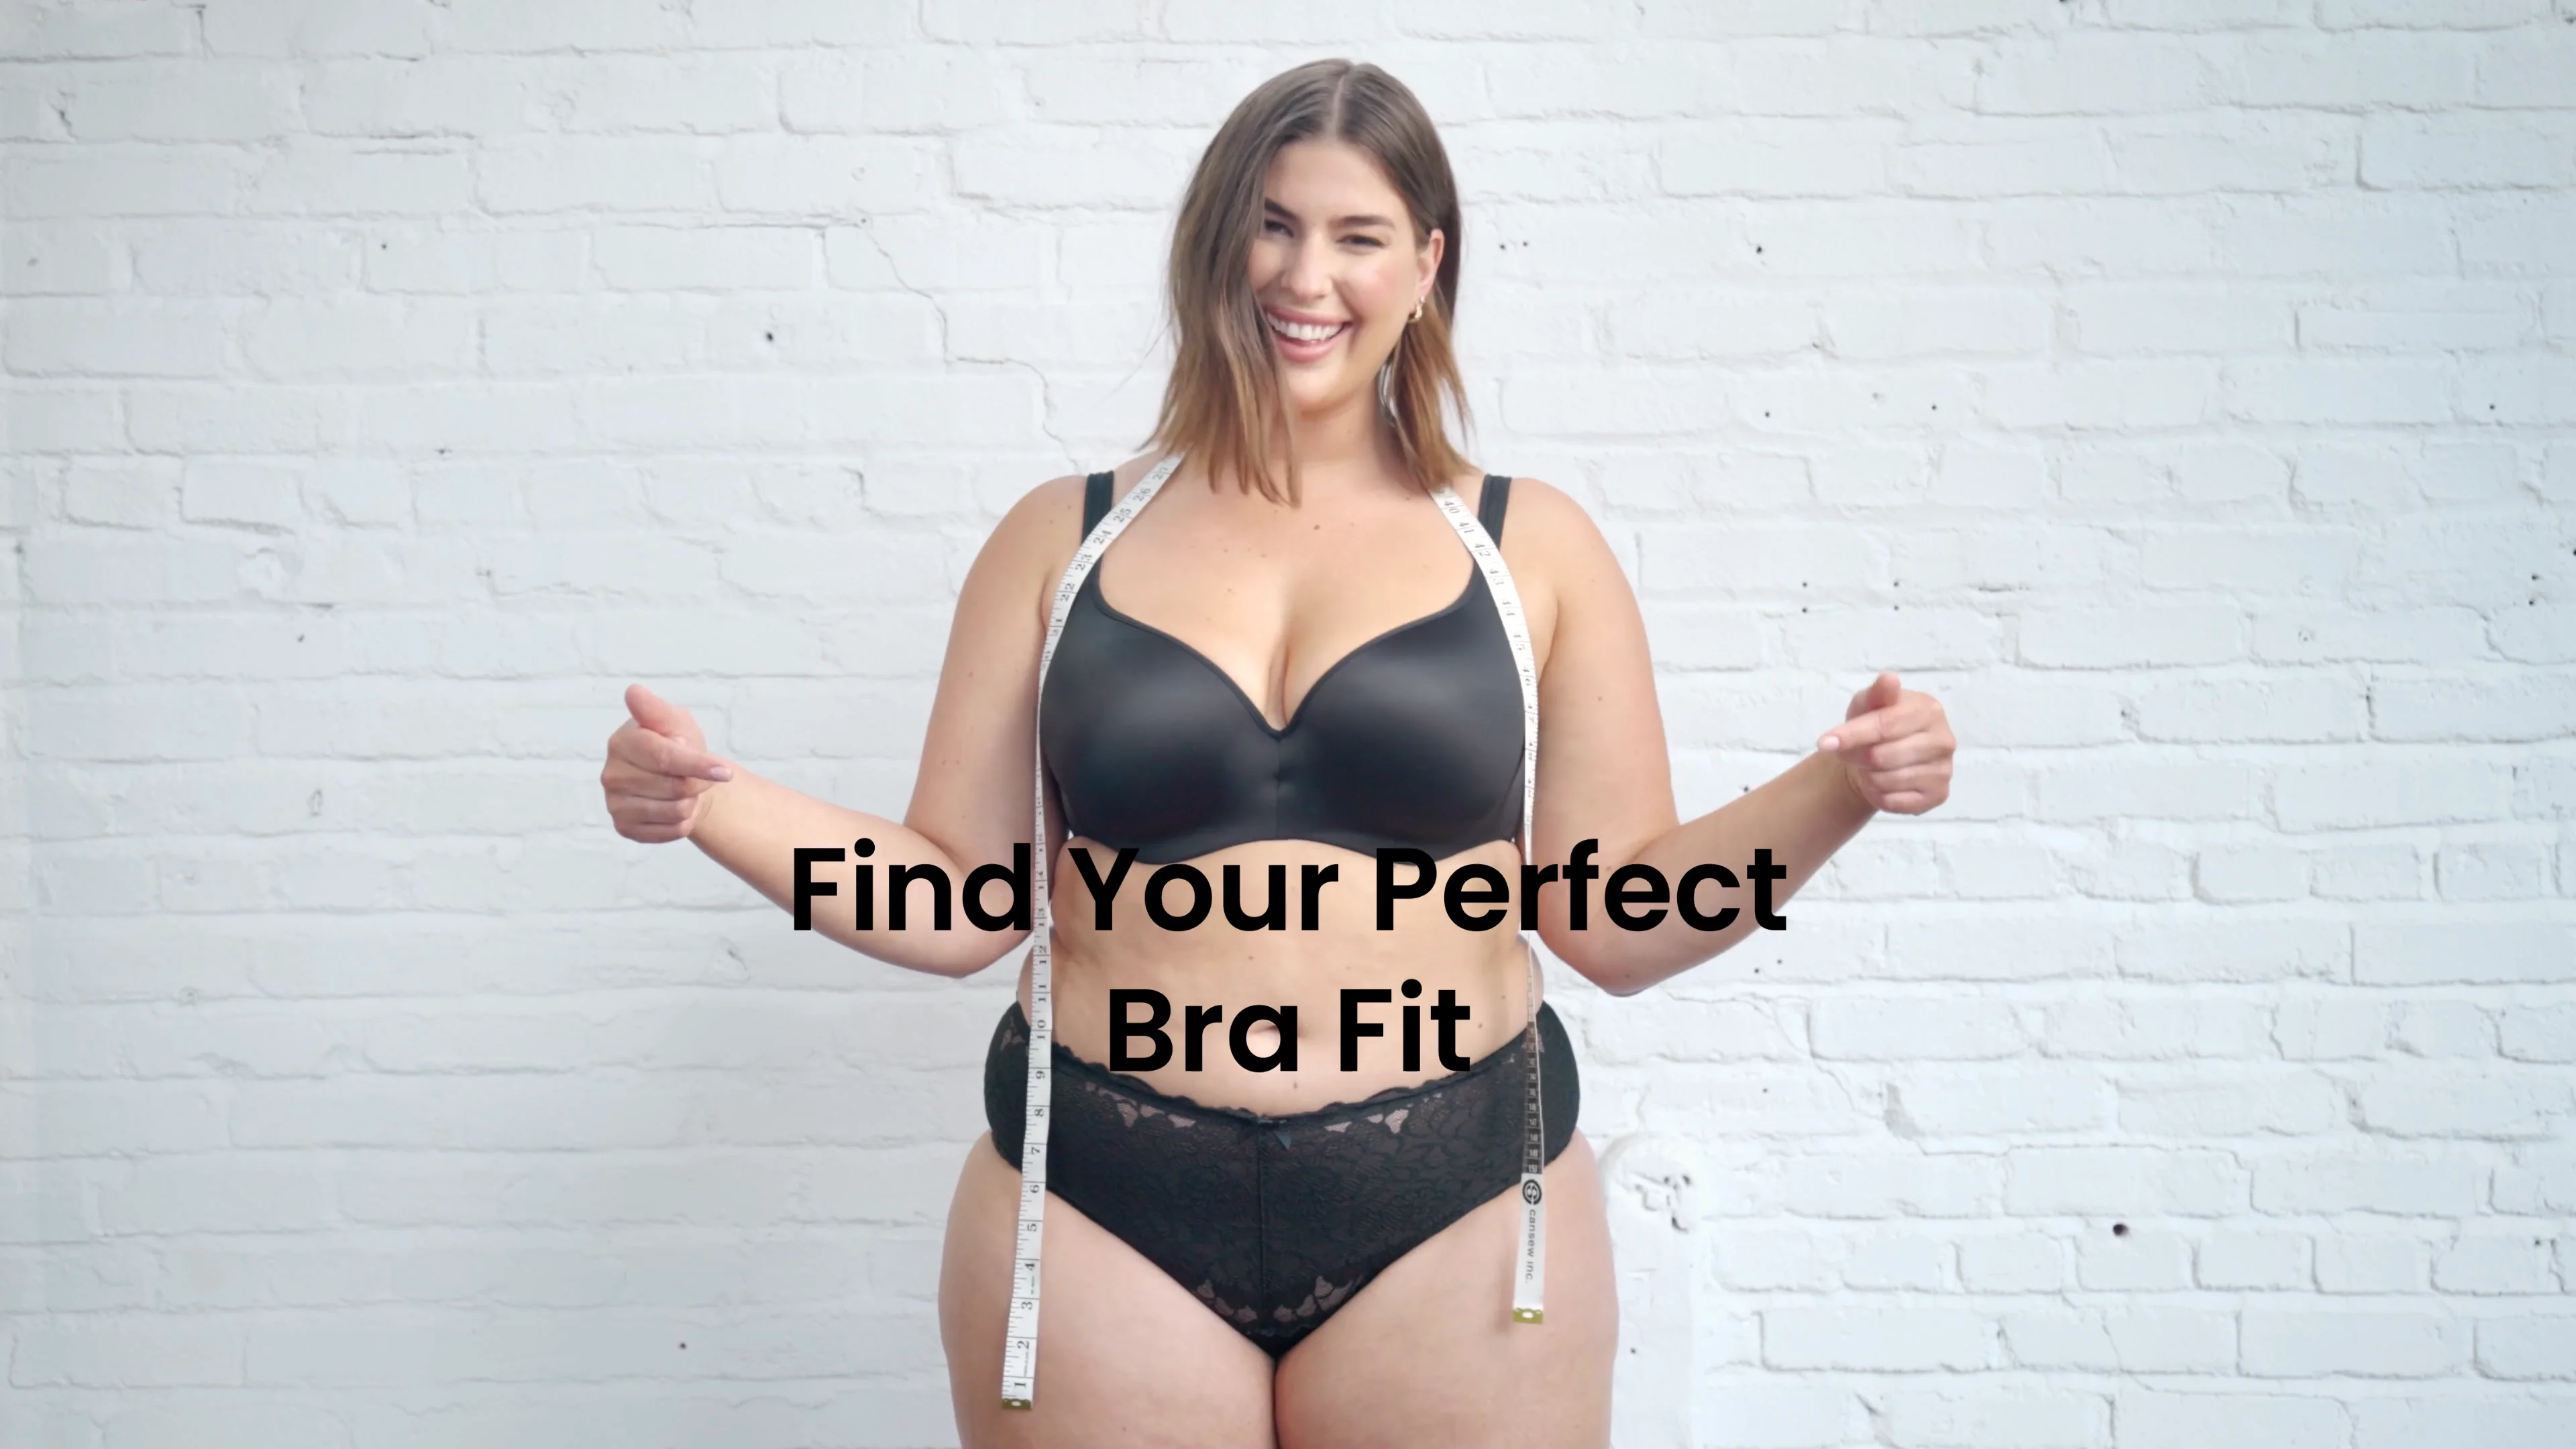 Find Your Perfect Bra Fit on Vimeo